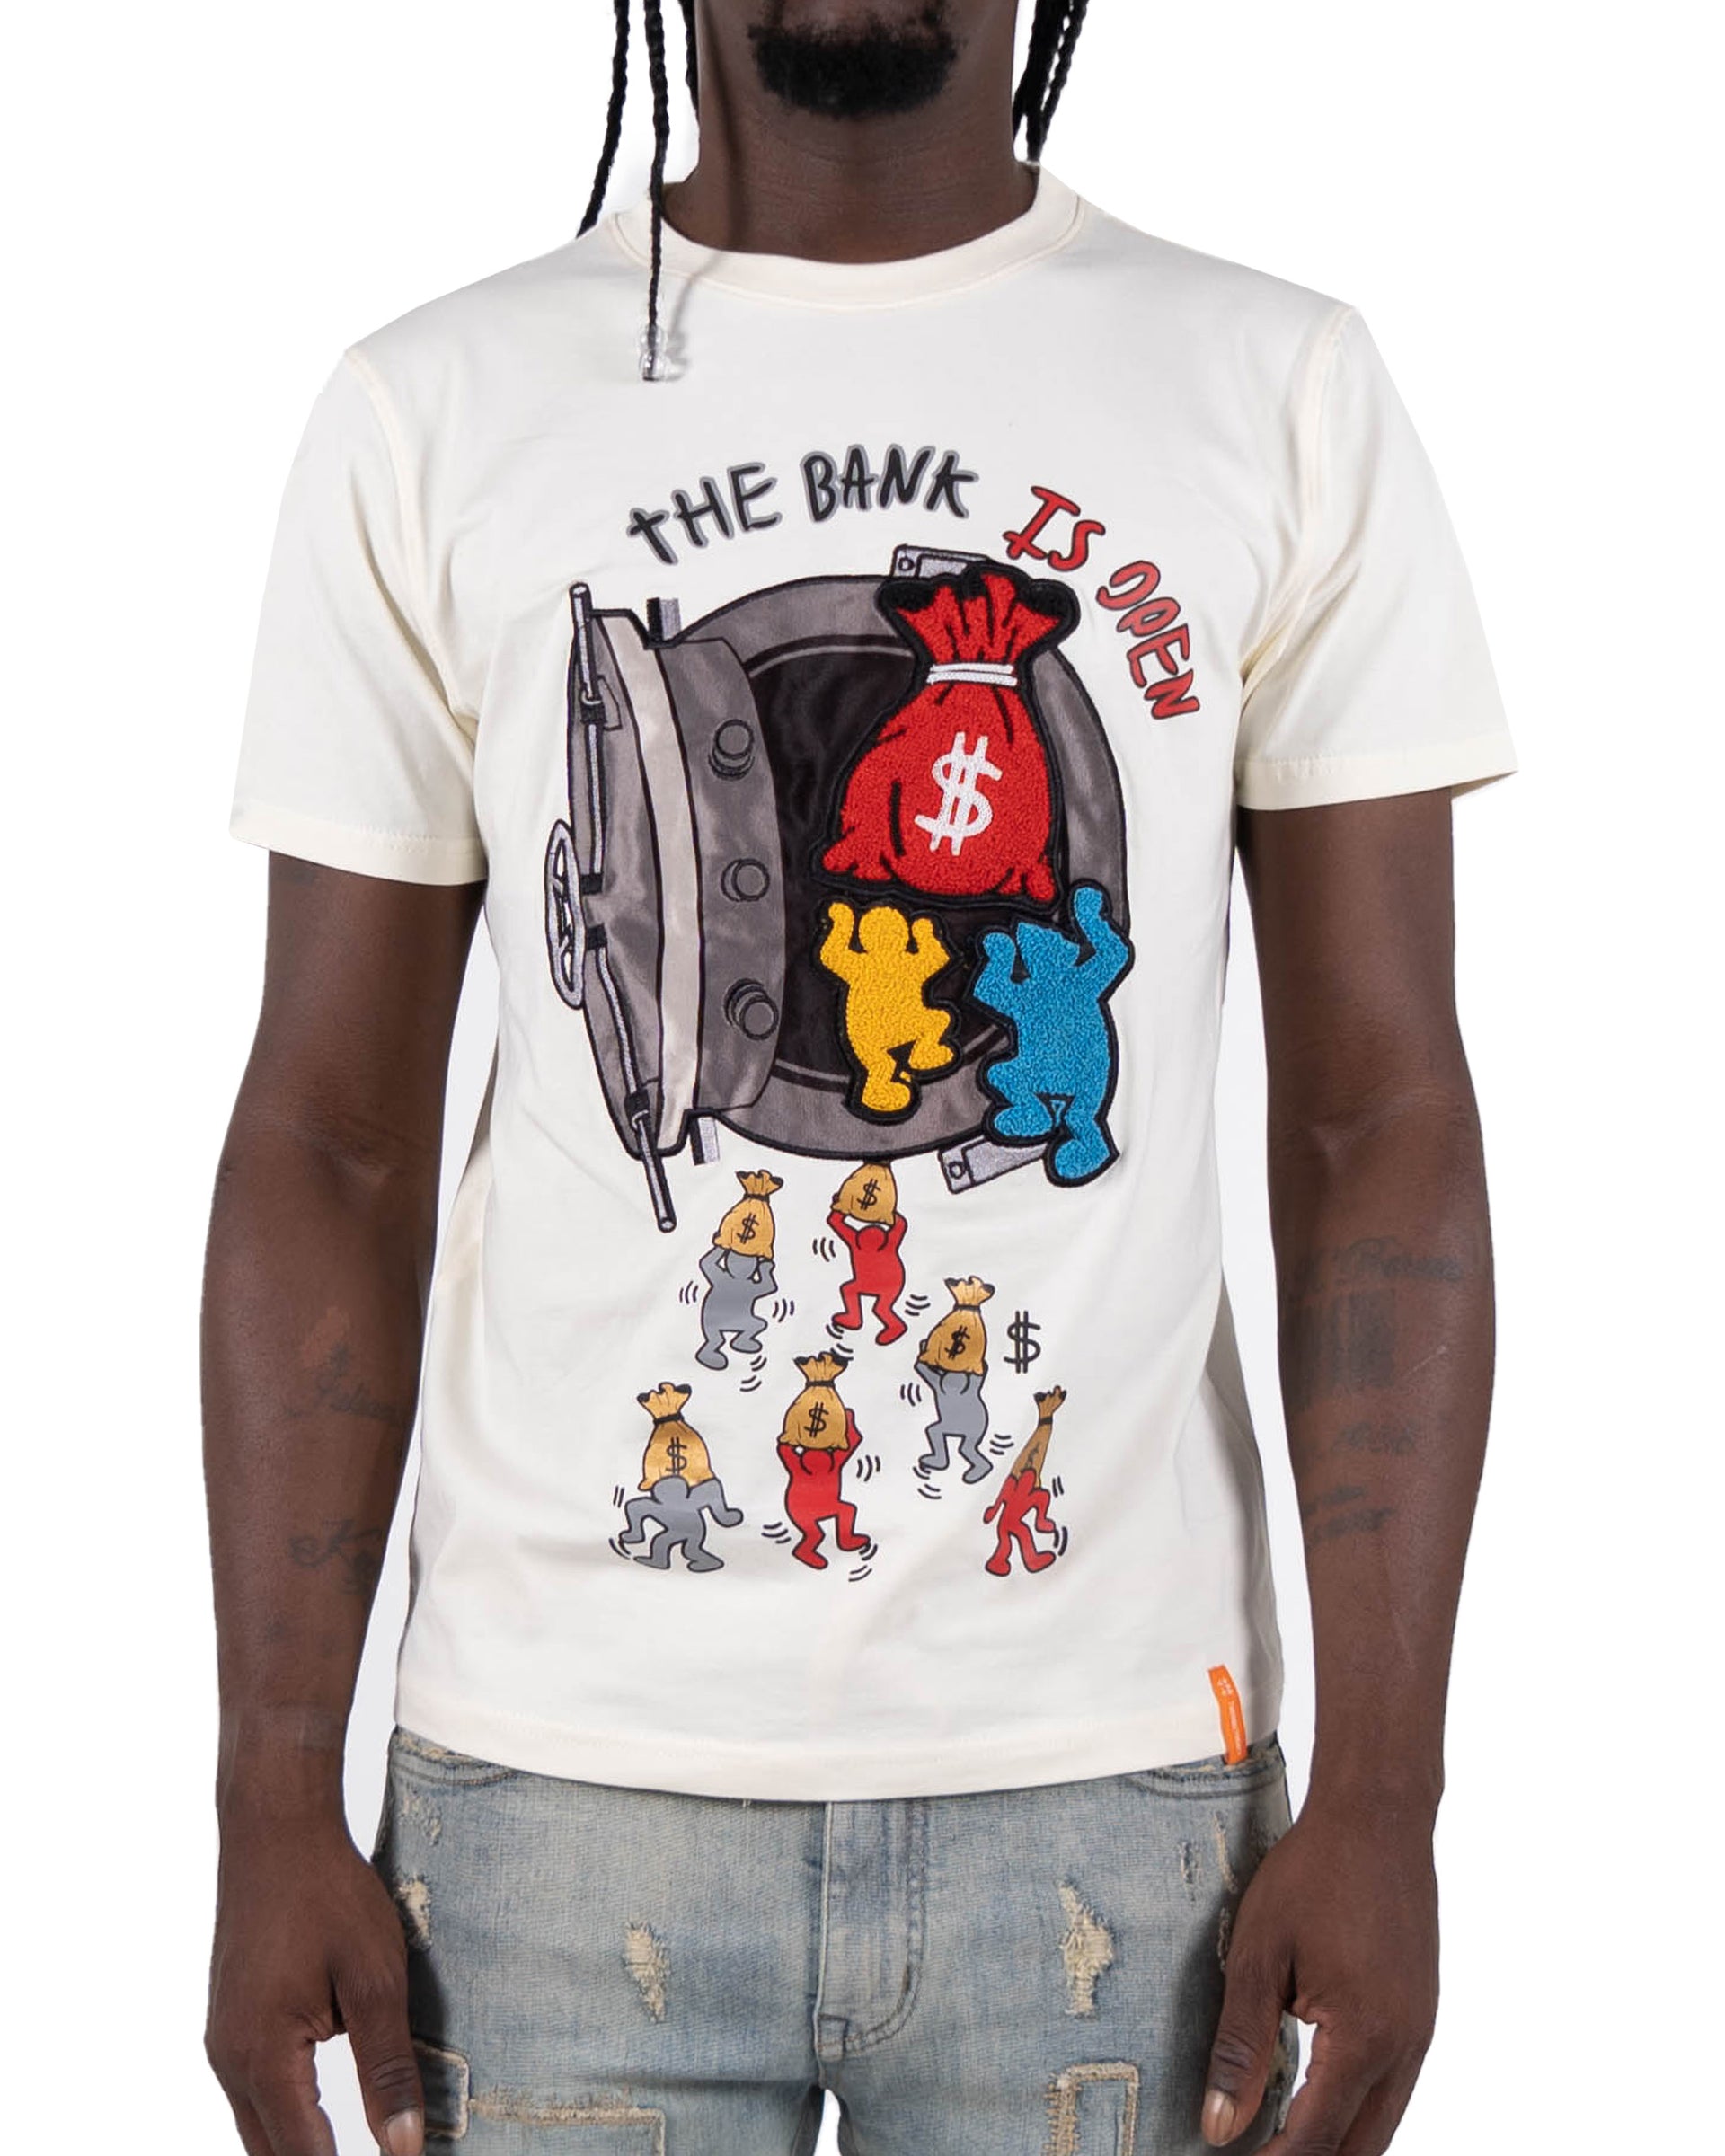 Men's "The Bank Is Open" Graphic T-Shirt | Off White